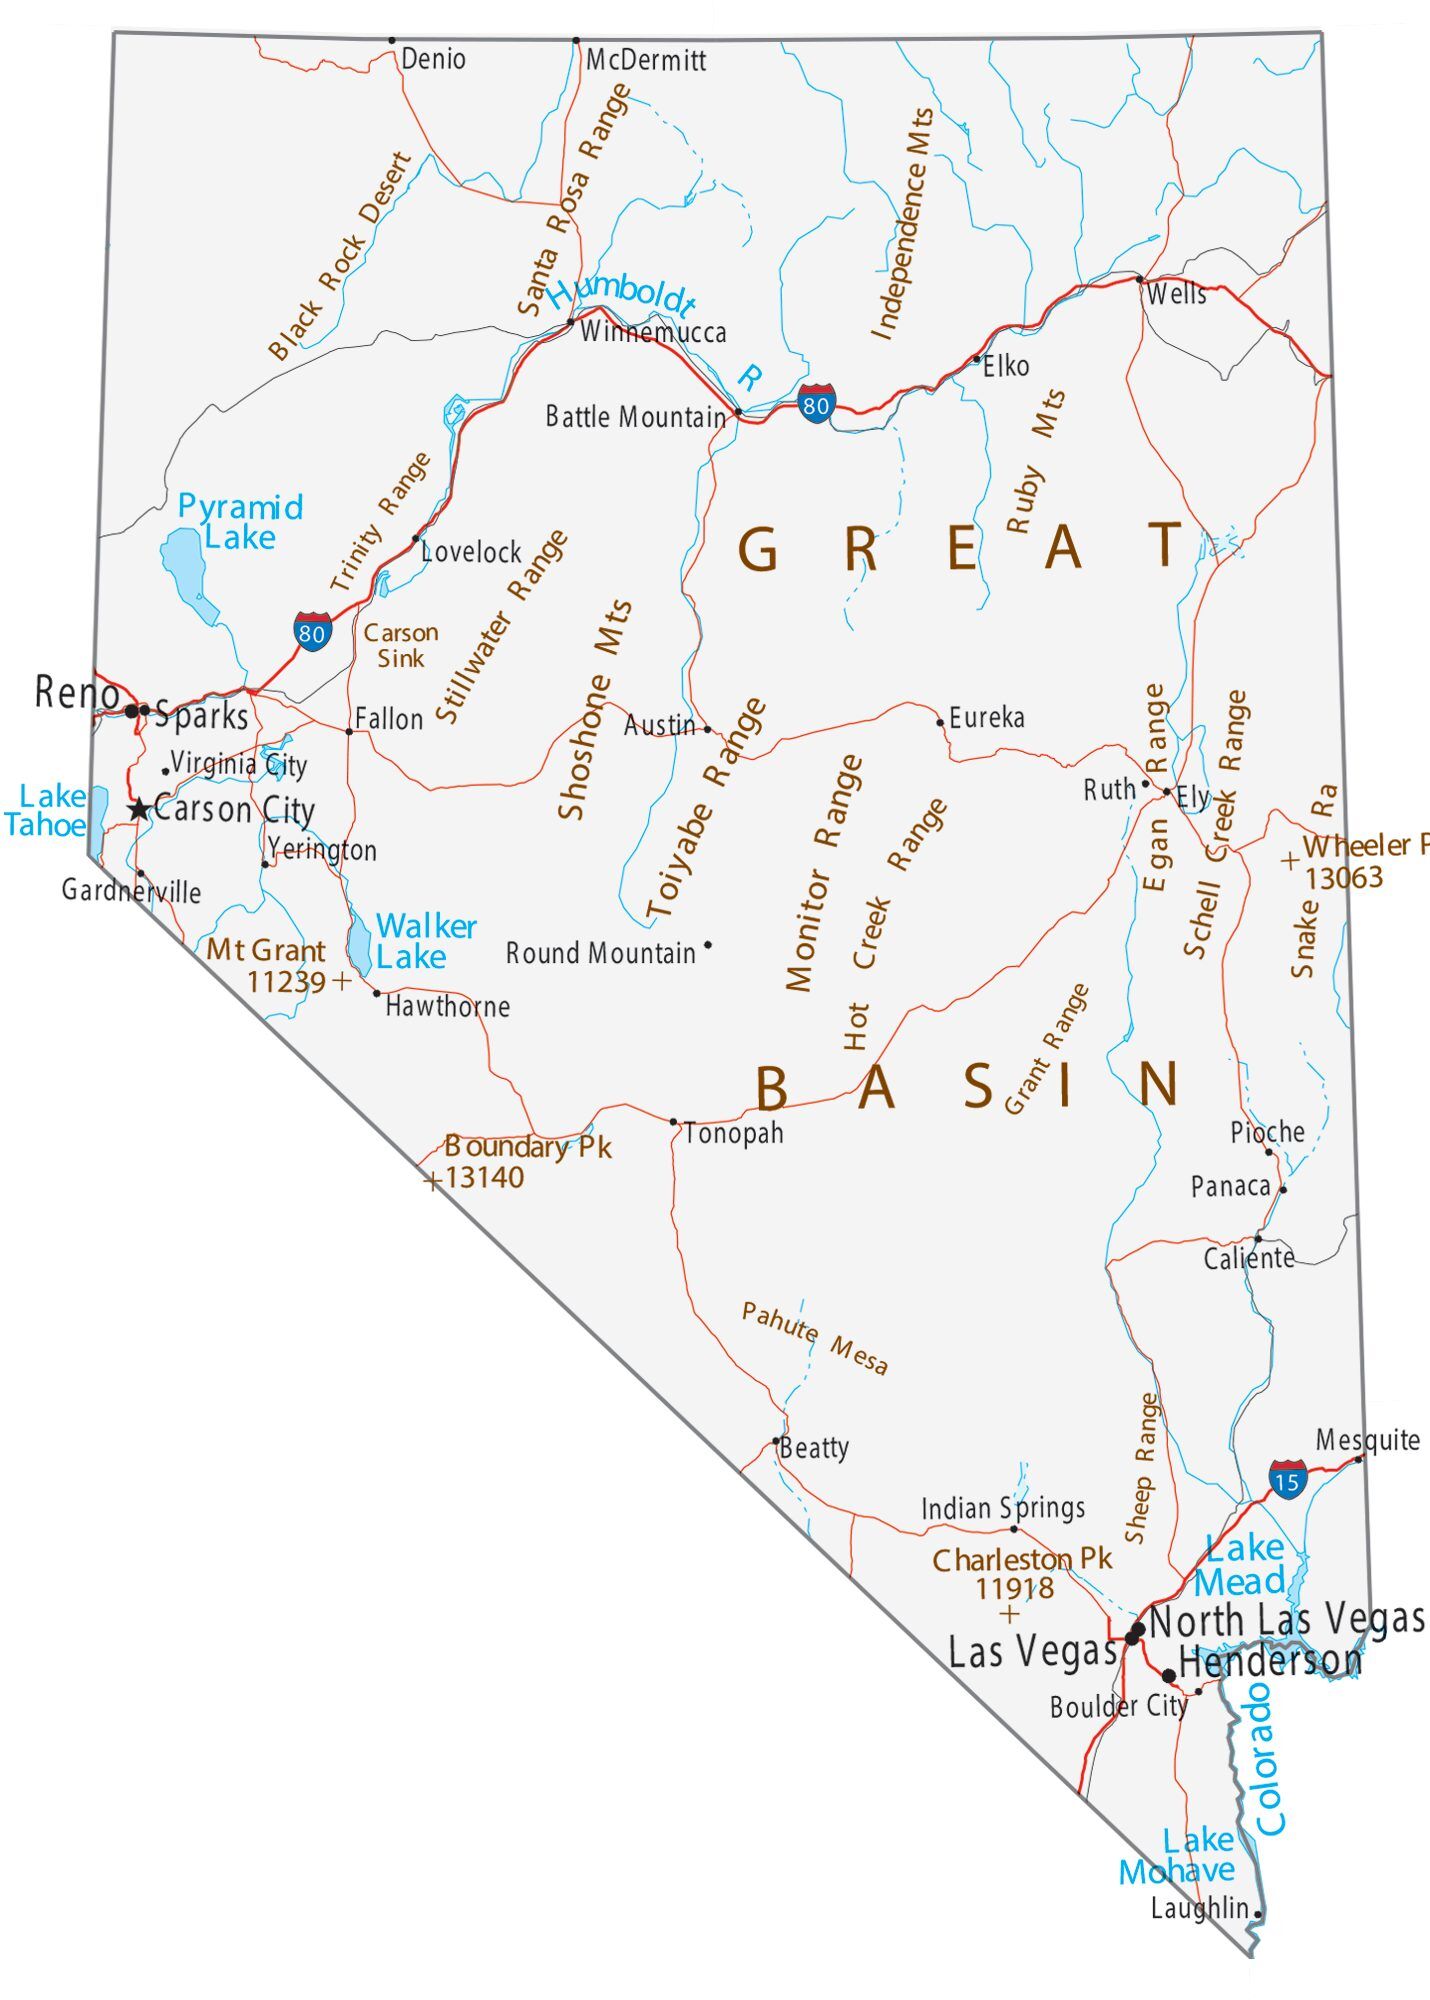 a map of nevada Map Of Nevada Cities And Roads Gis Geography a map of nevada